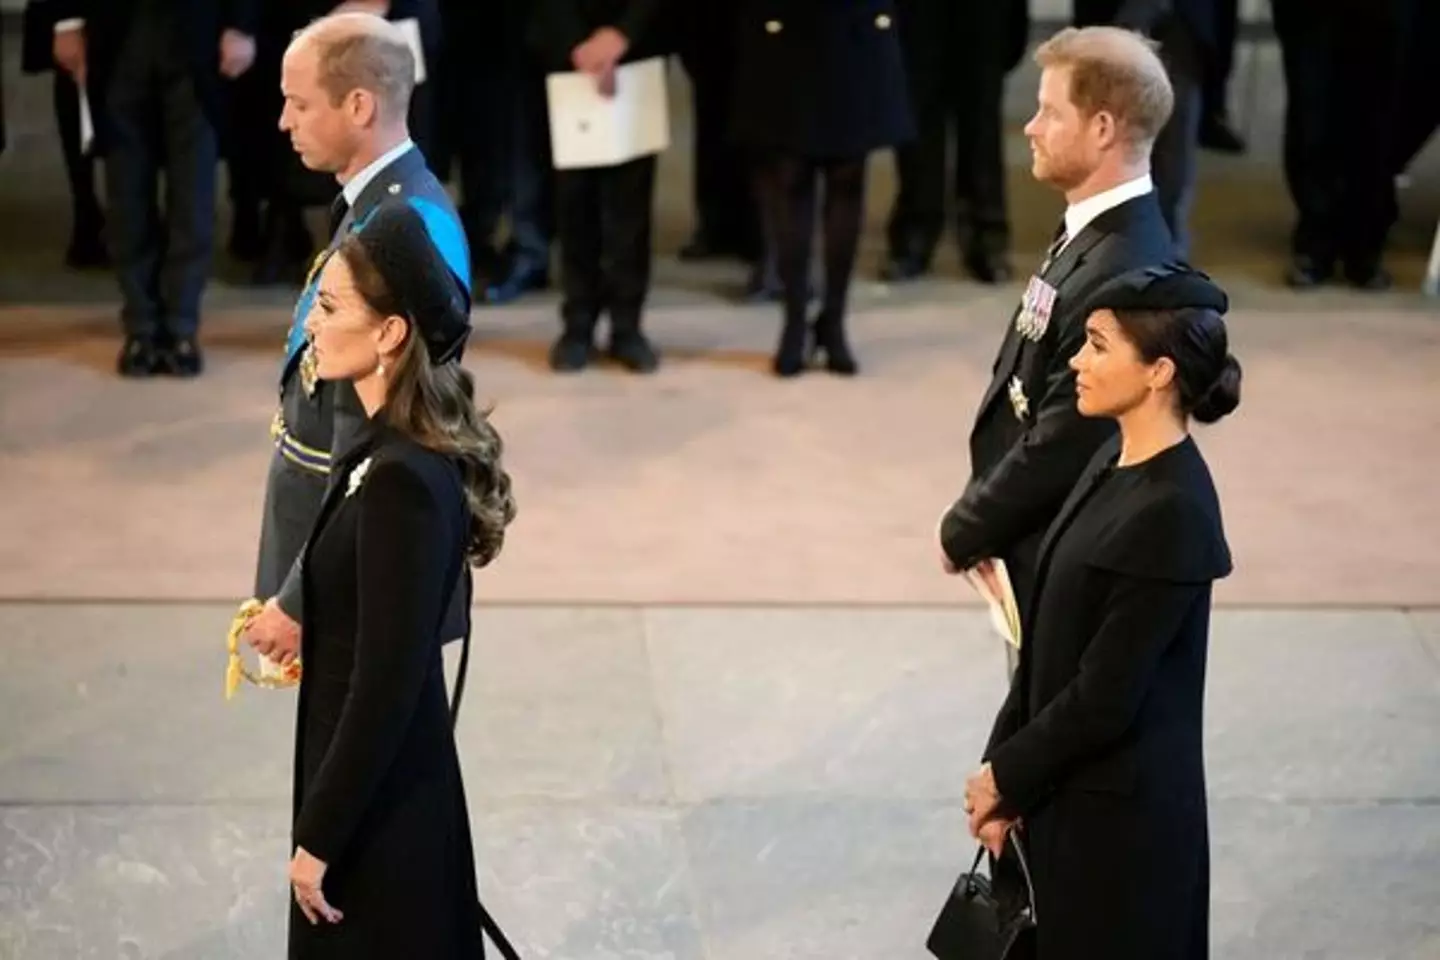 The Duke and Duchess of Sussex attended the Queen's funeral in 2022. (CHRISTOPHER FURLONG/POOL/AFP via Getty Images)